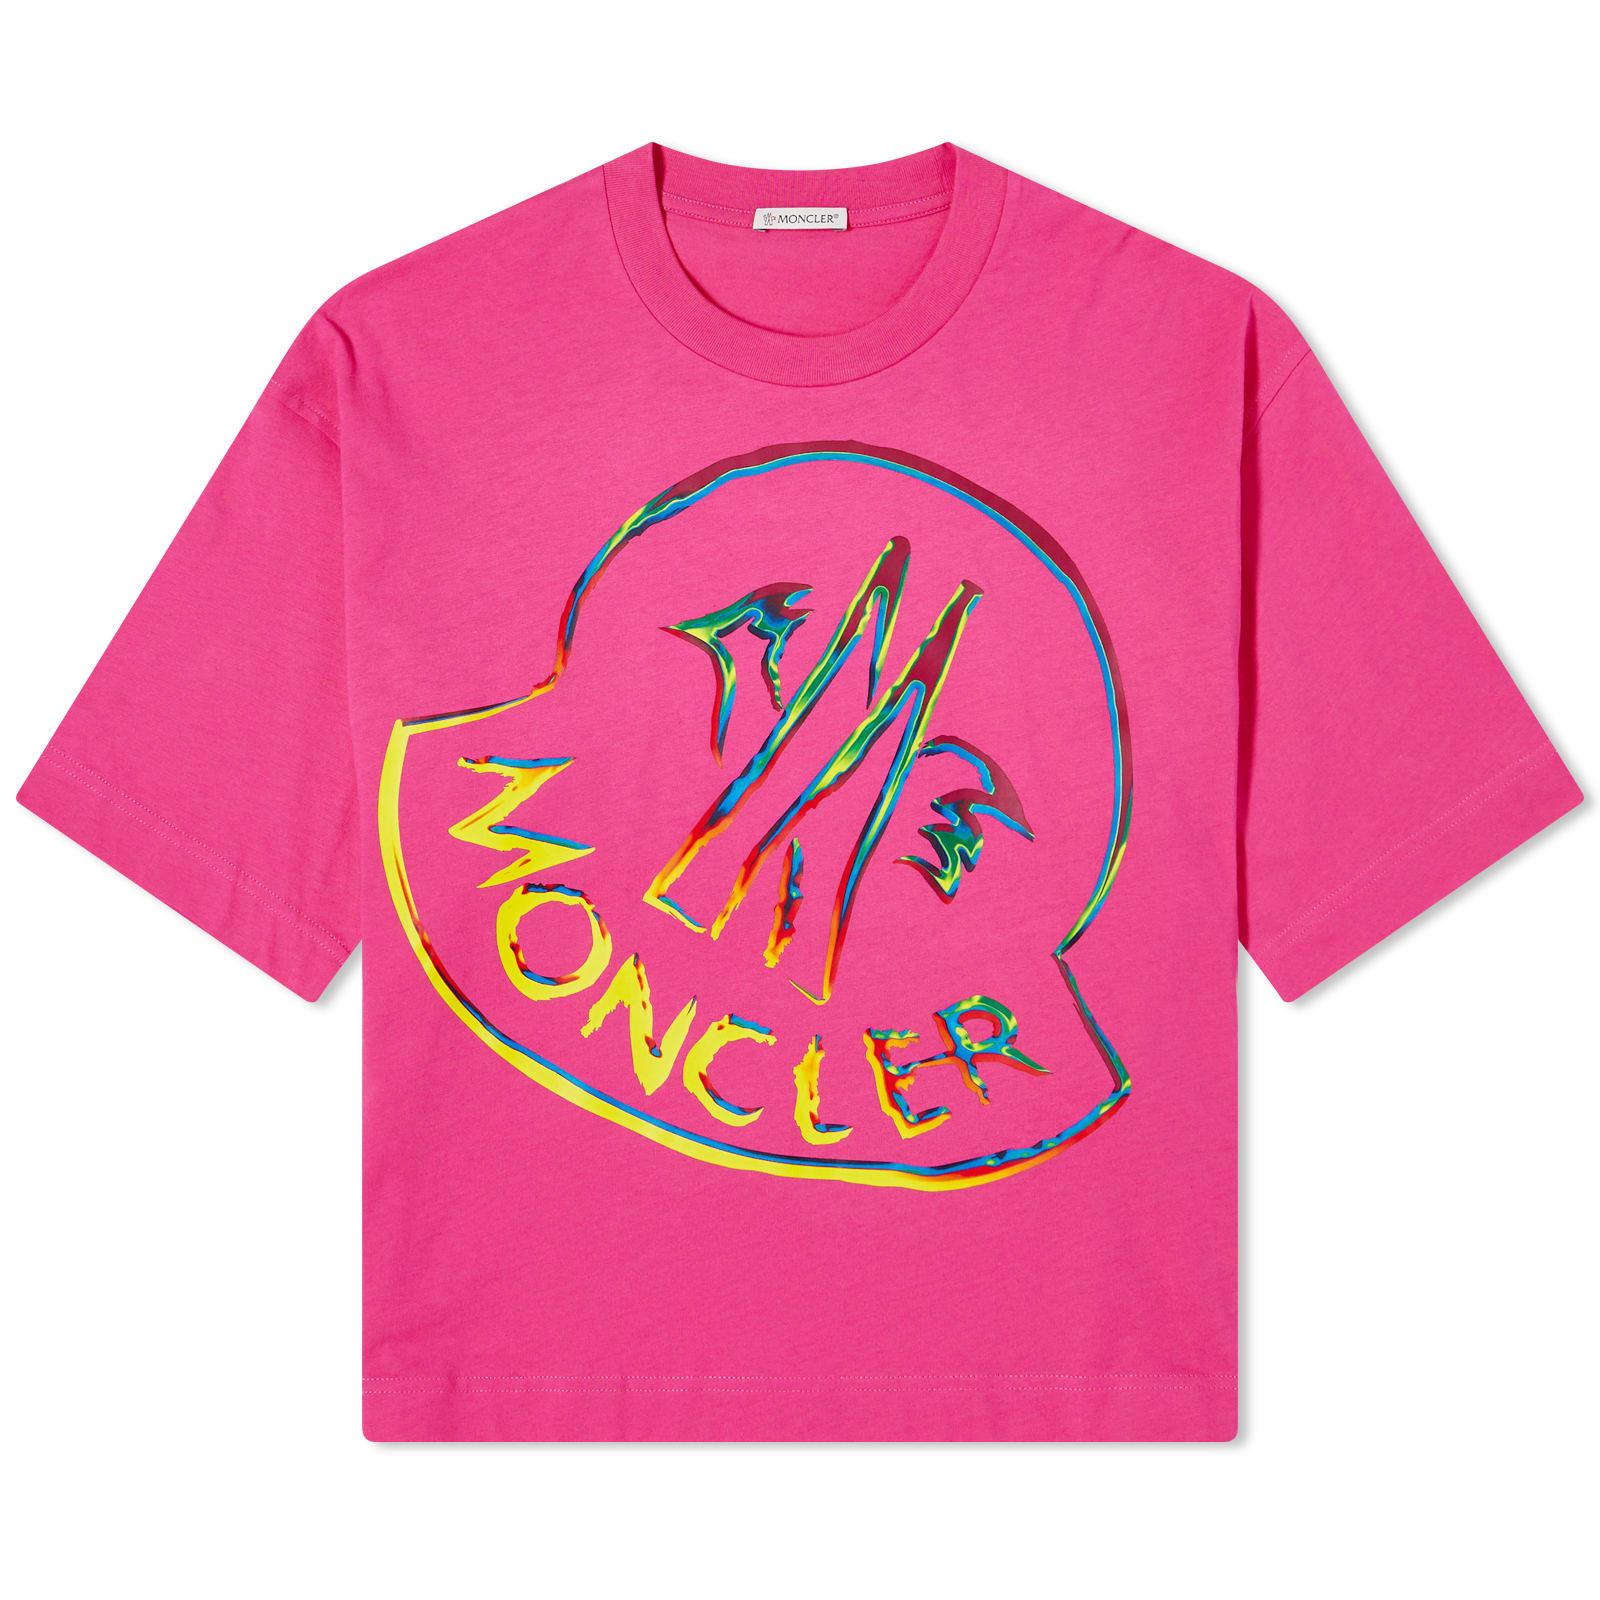 Moncler Rainbow Logo T-shirt in Pink | Lyst